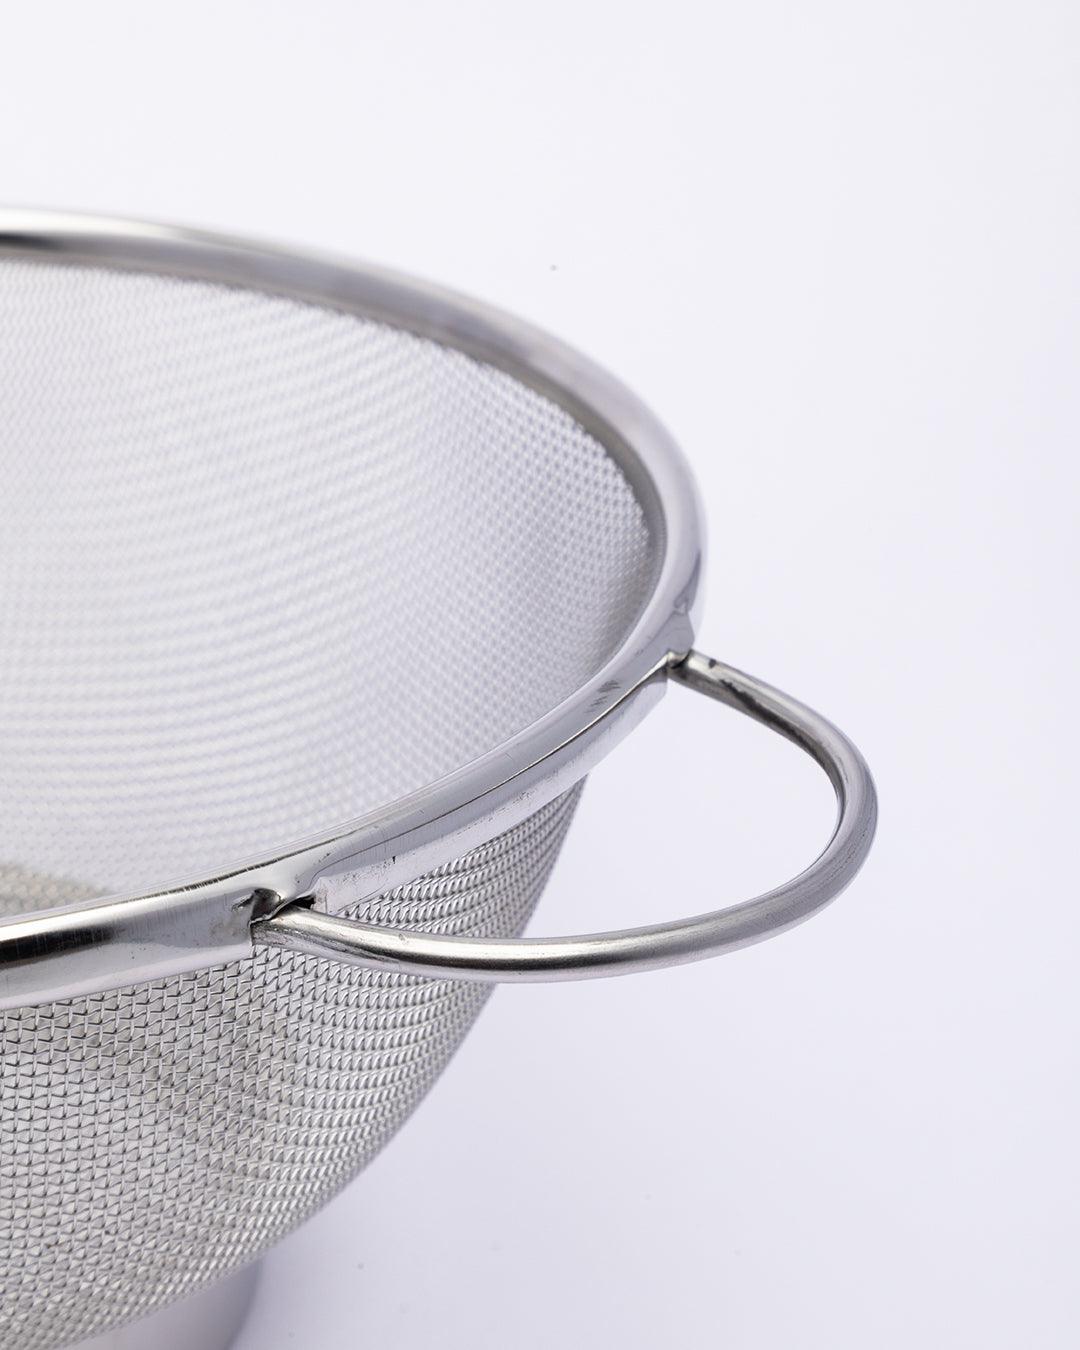 Stainless Steel Colander, Precision Pierced Strainer For Pasta, Rice, & Fruits, Wide Rim & Handles, Steaming, Draining & Rinsing, Silver, Stainless Steel - MARKET 99